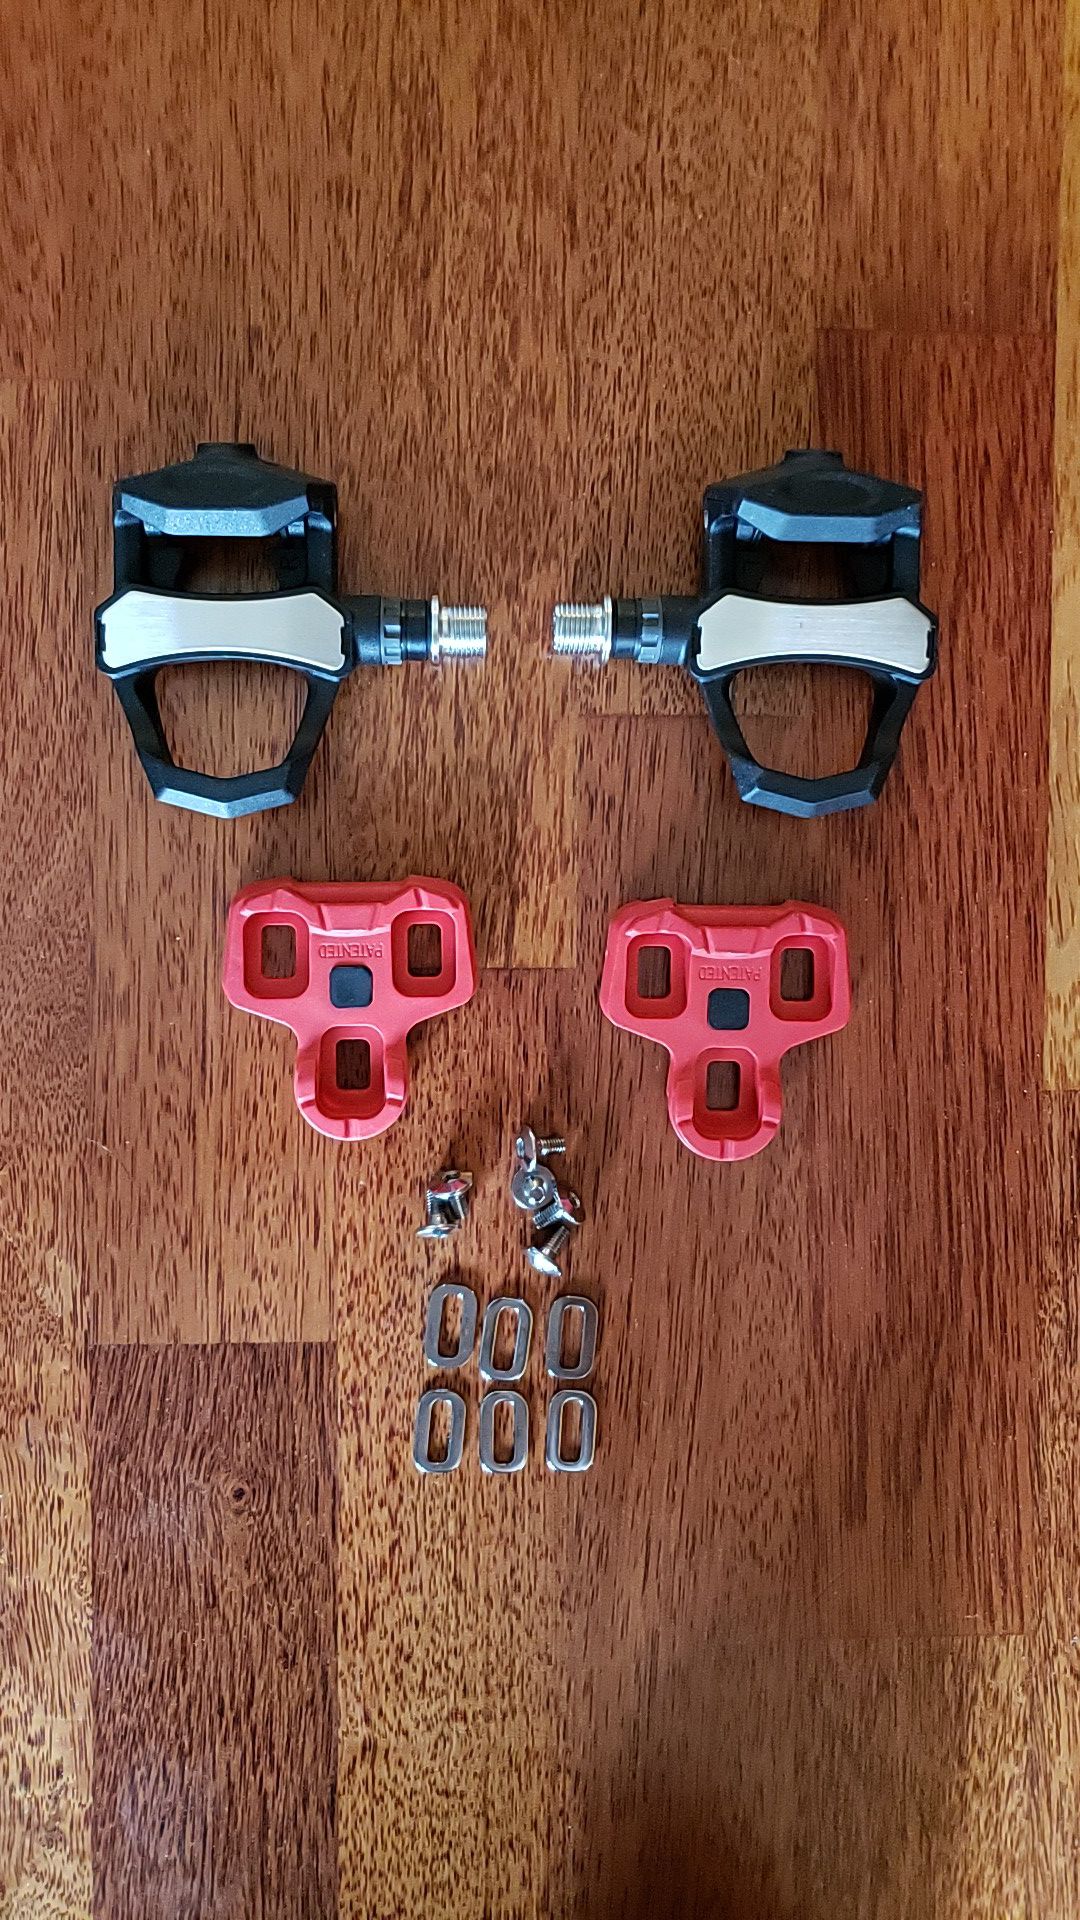 Delta Style Cycling Pedals, Clips (for your shoes) and moubting hardware . For Road Bikes, Peloton, exercise and Mountain Bikes!